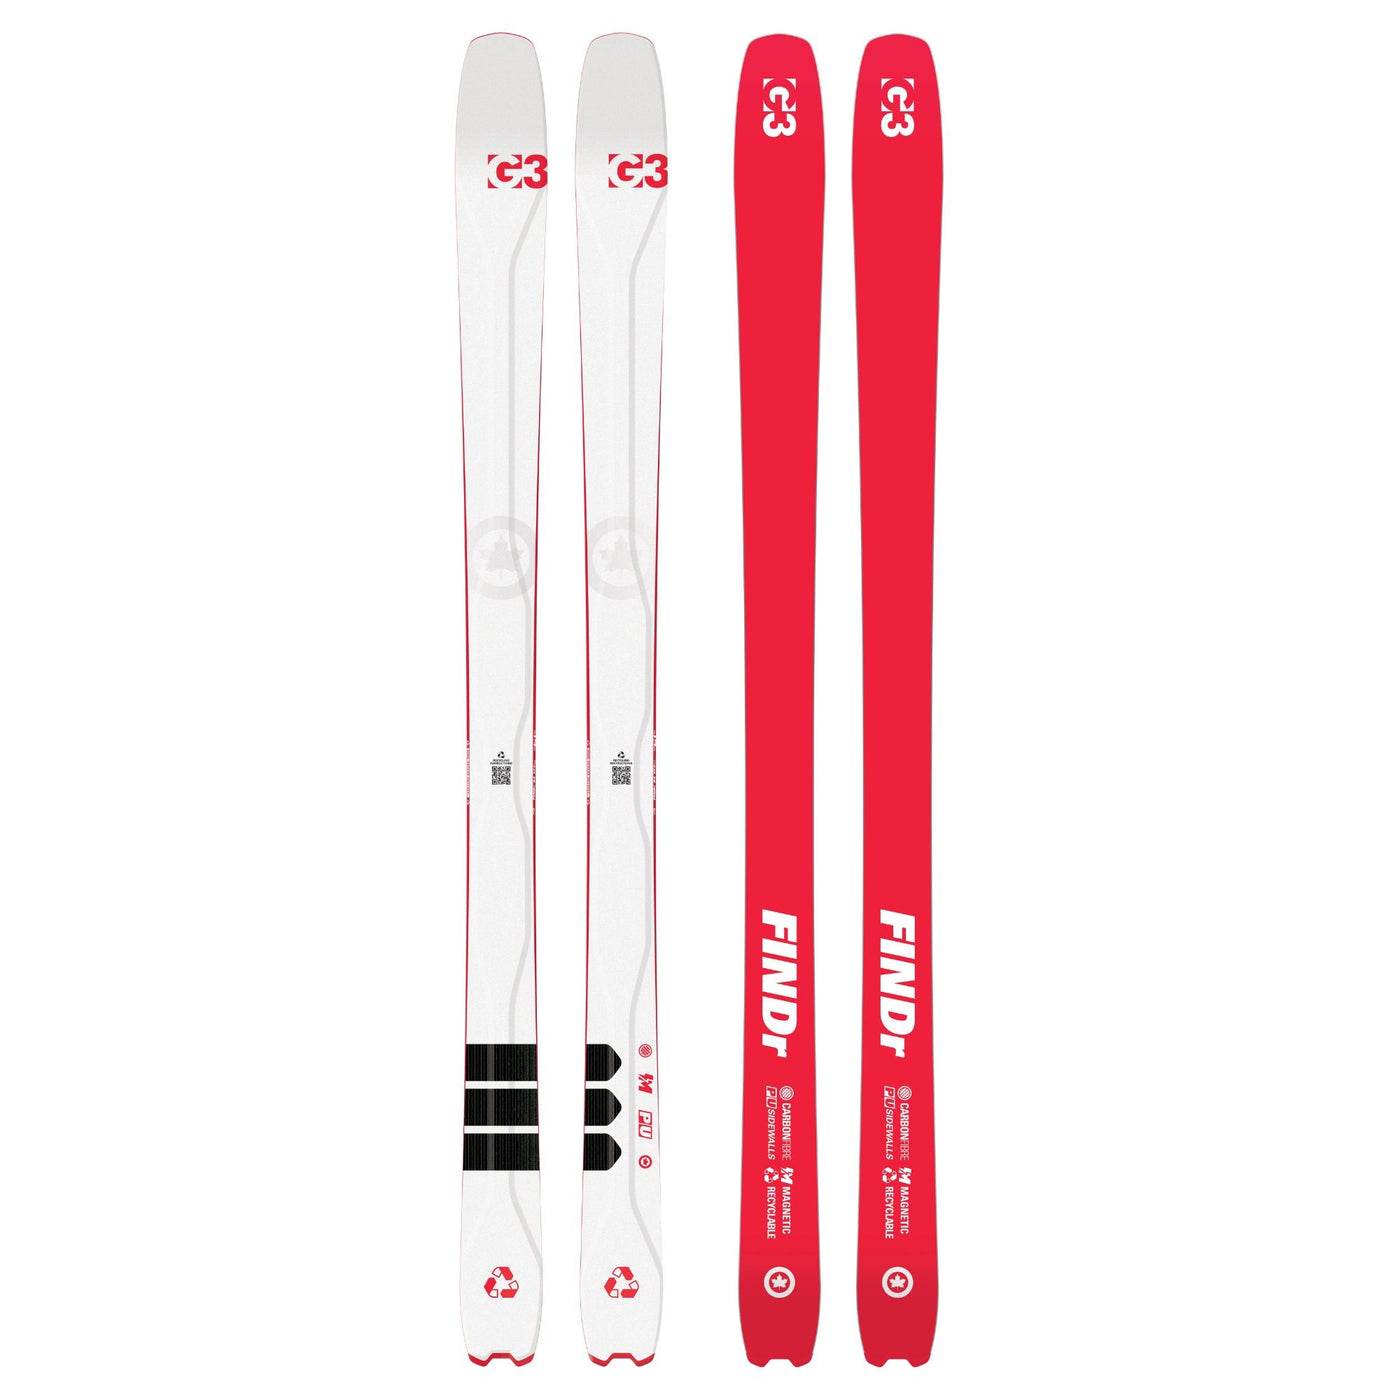 findr r3 94 skis studio product photo